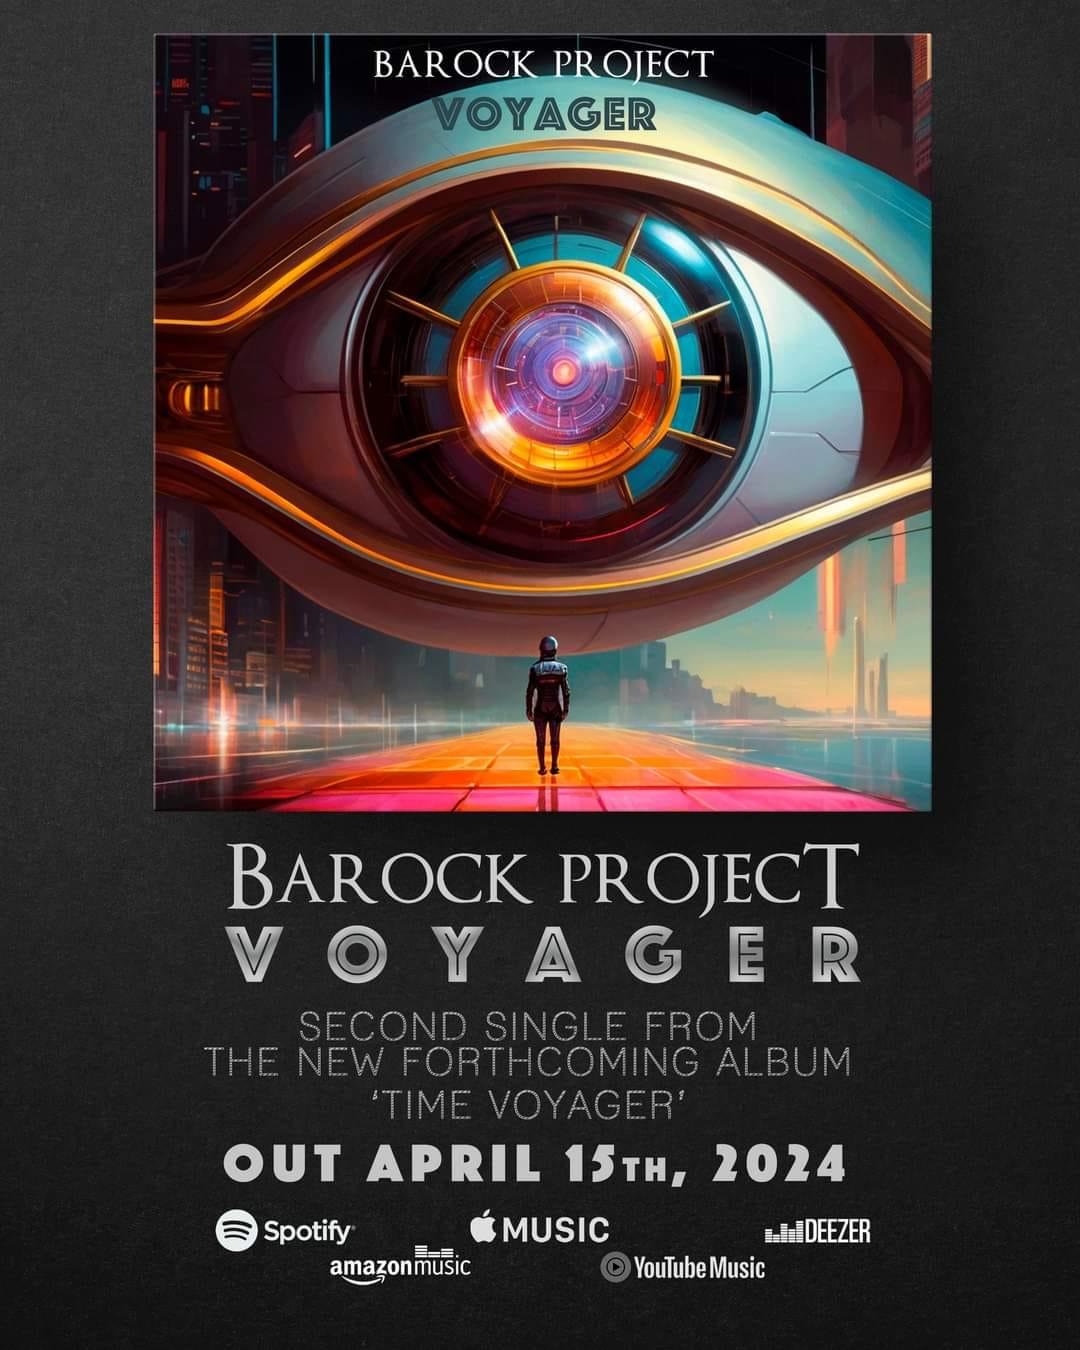 BAROCK PROJECT: "The Lost Tavern Ship" and "Voyager", available on digital stores